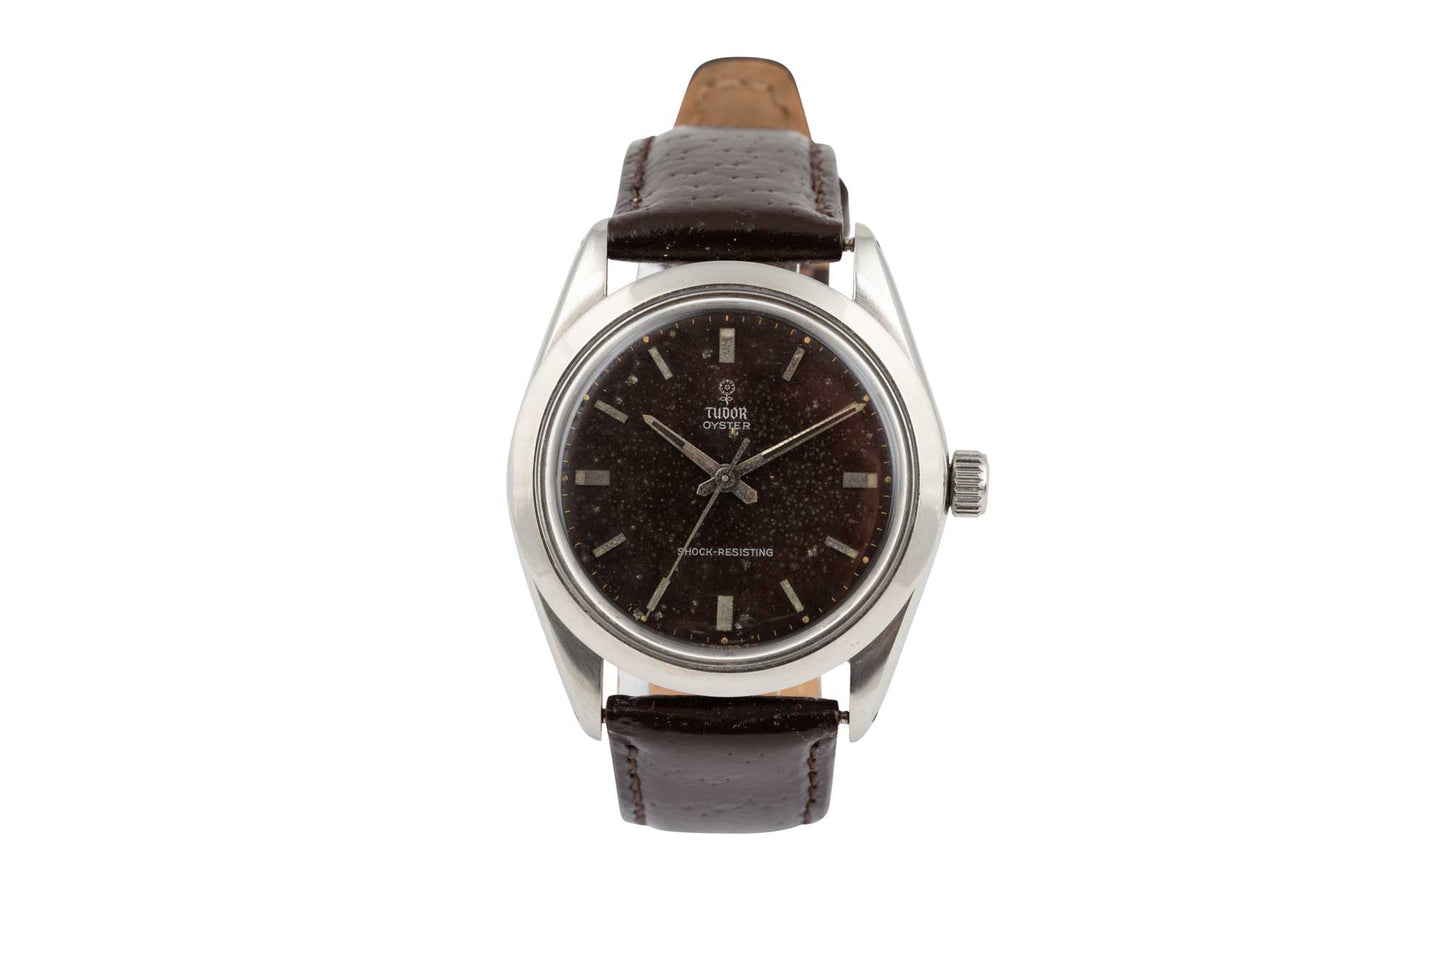 Rolex Tudor Oyster Original Chocolate brown Patina Dial Small Rose Model 7984 1966 - Wilson Watches 